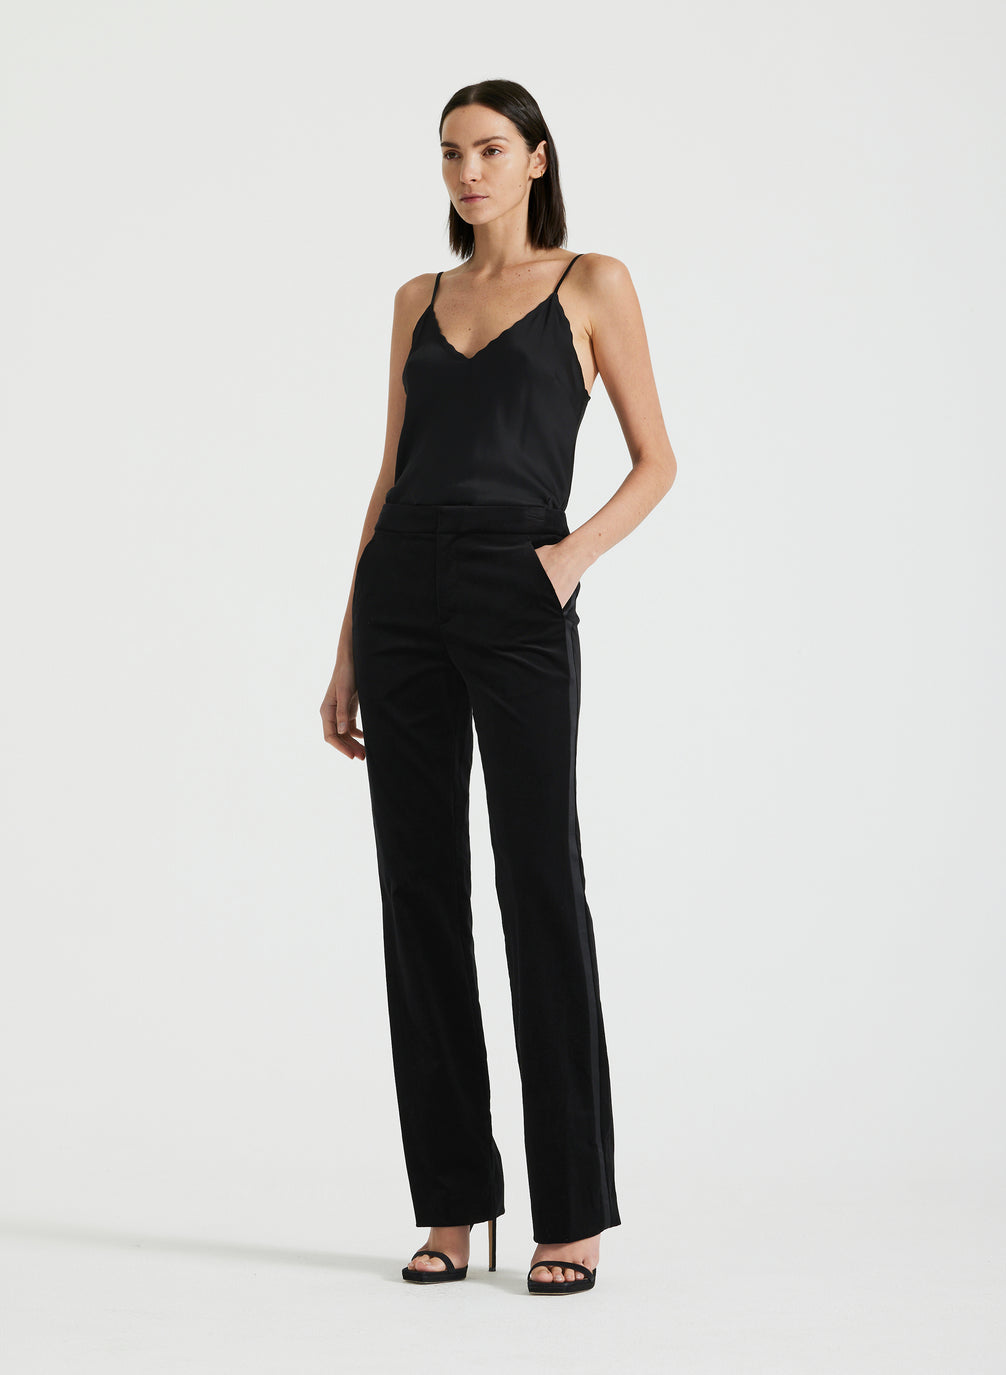 side view of woman wearing black satin camisole and black velvet pants